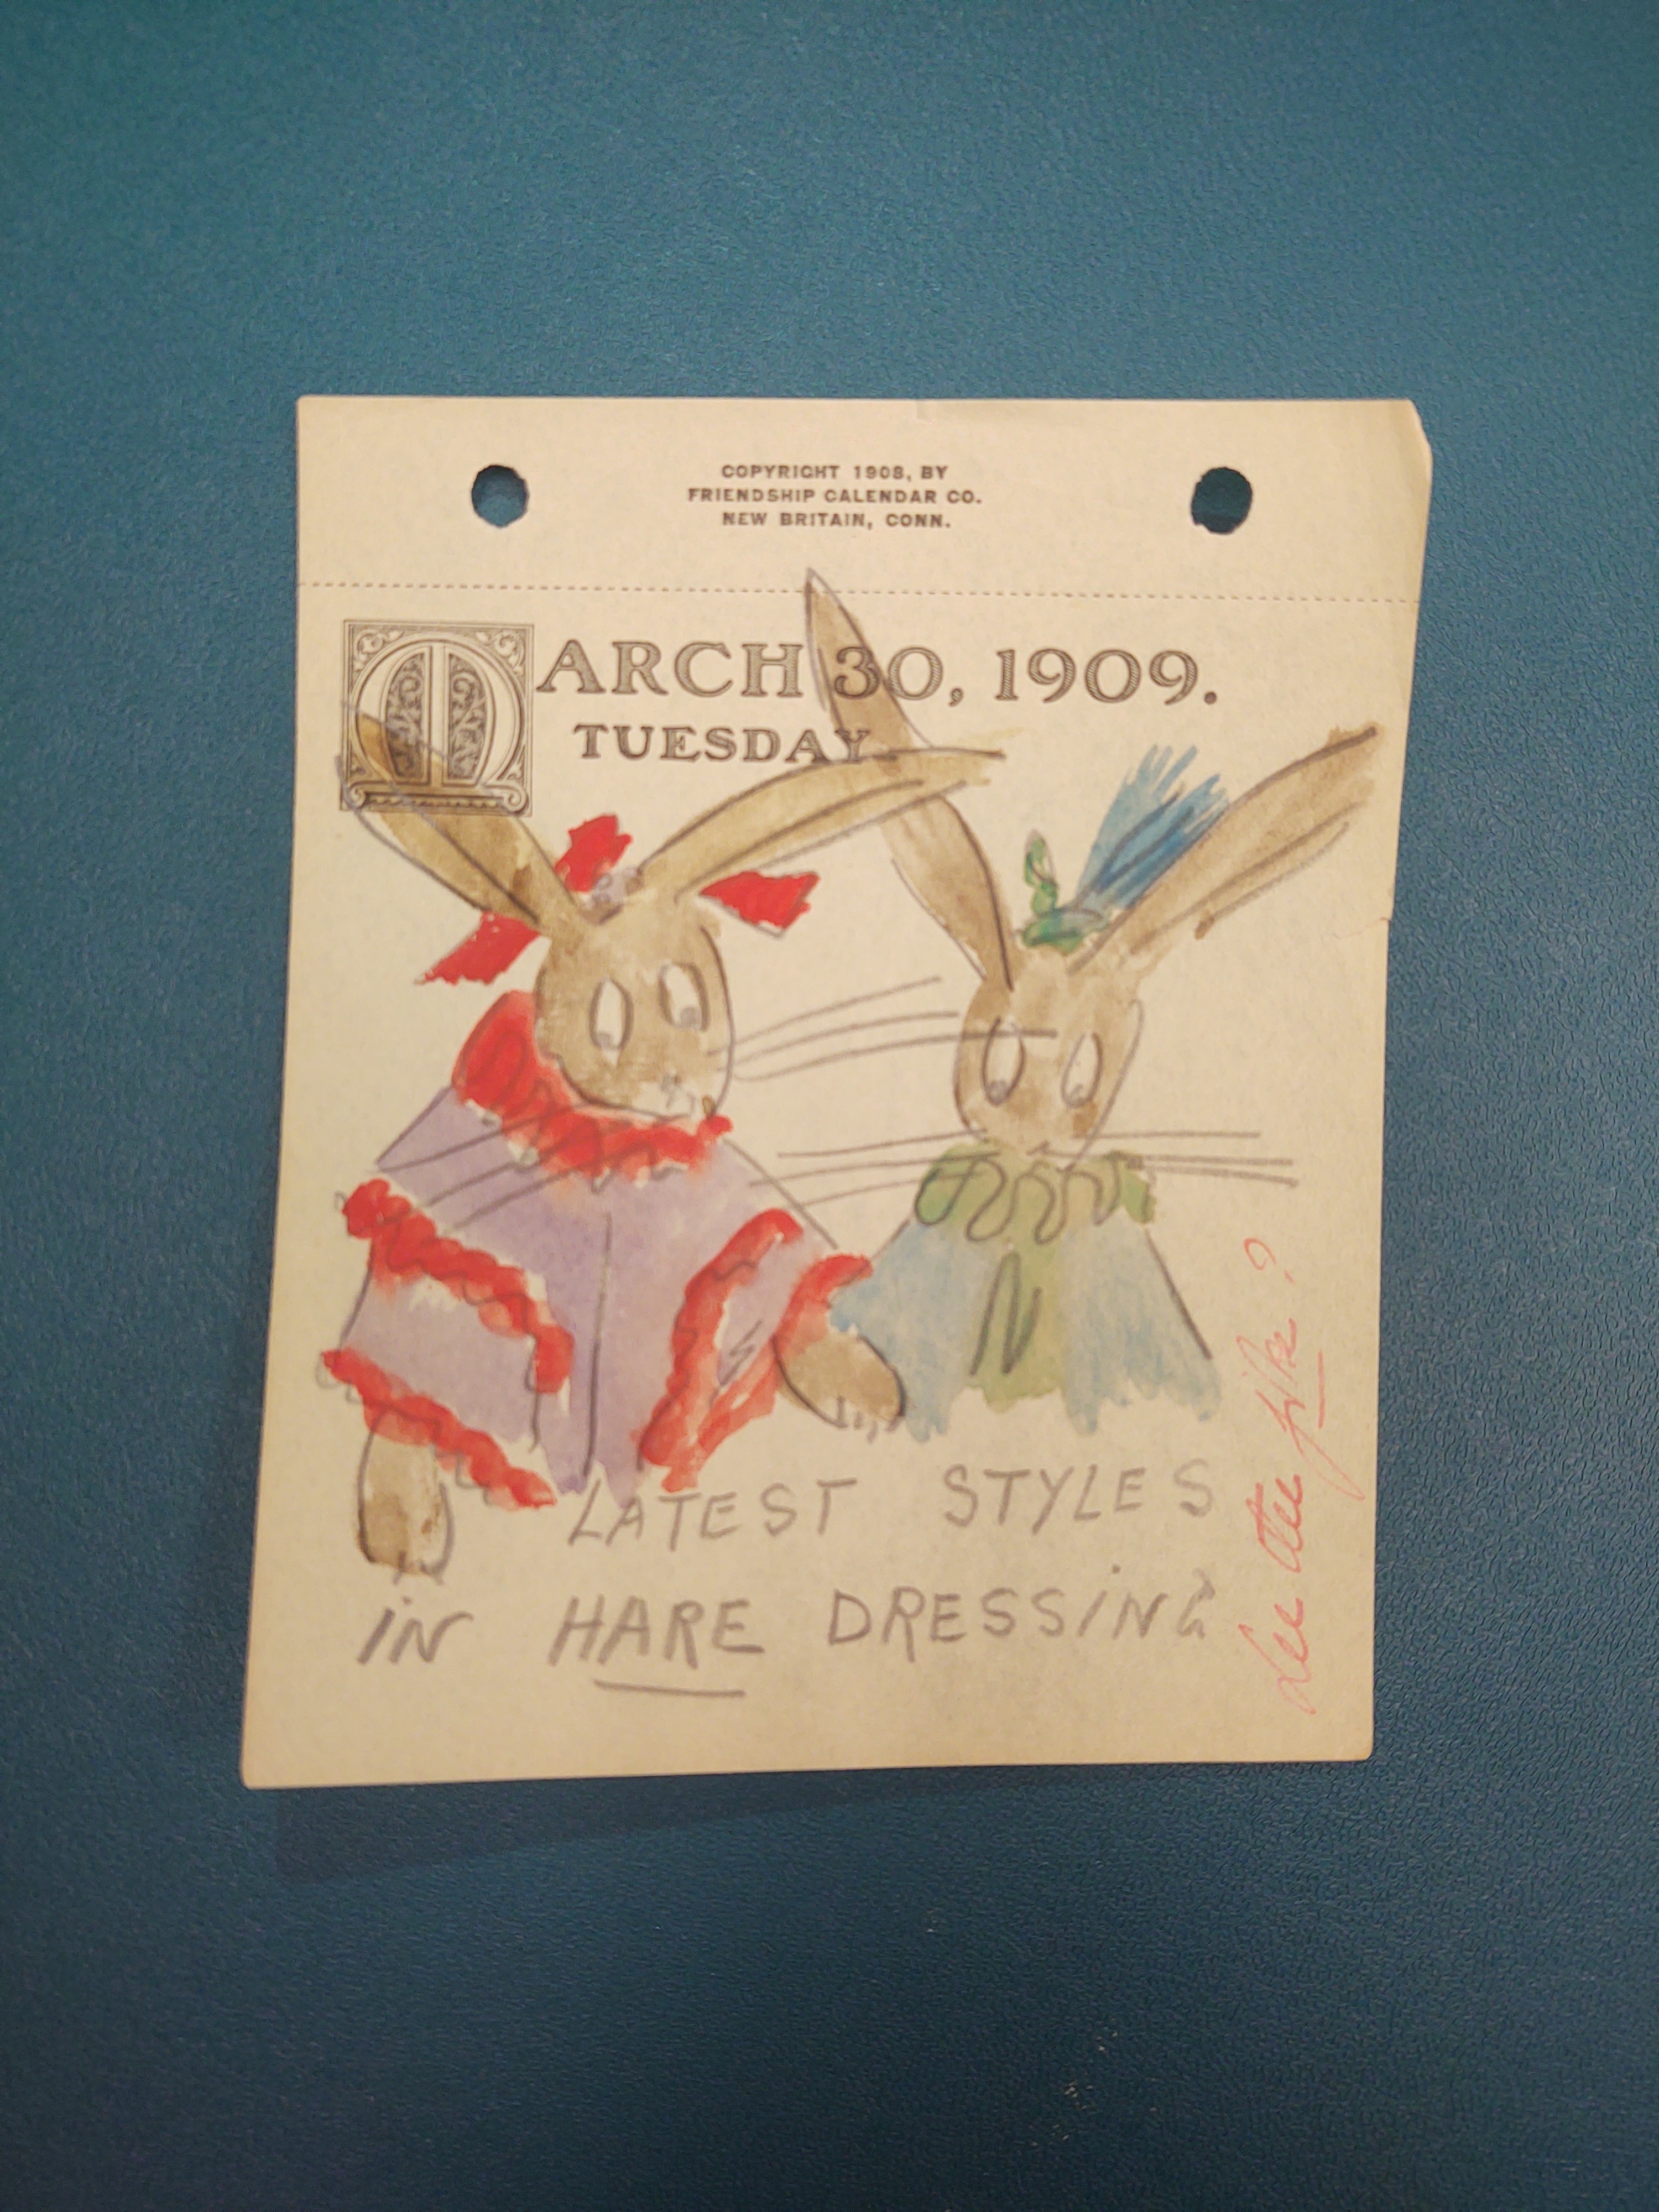 March 30, 1909. Tuesday: Two rabbits (or hares) next to each other. They are both dressed in fun and colorful clothing. This is right below the date on the middle of the page.